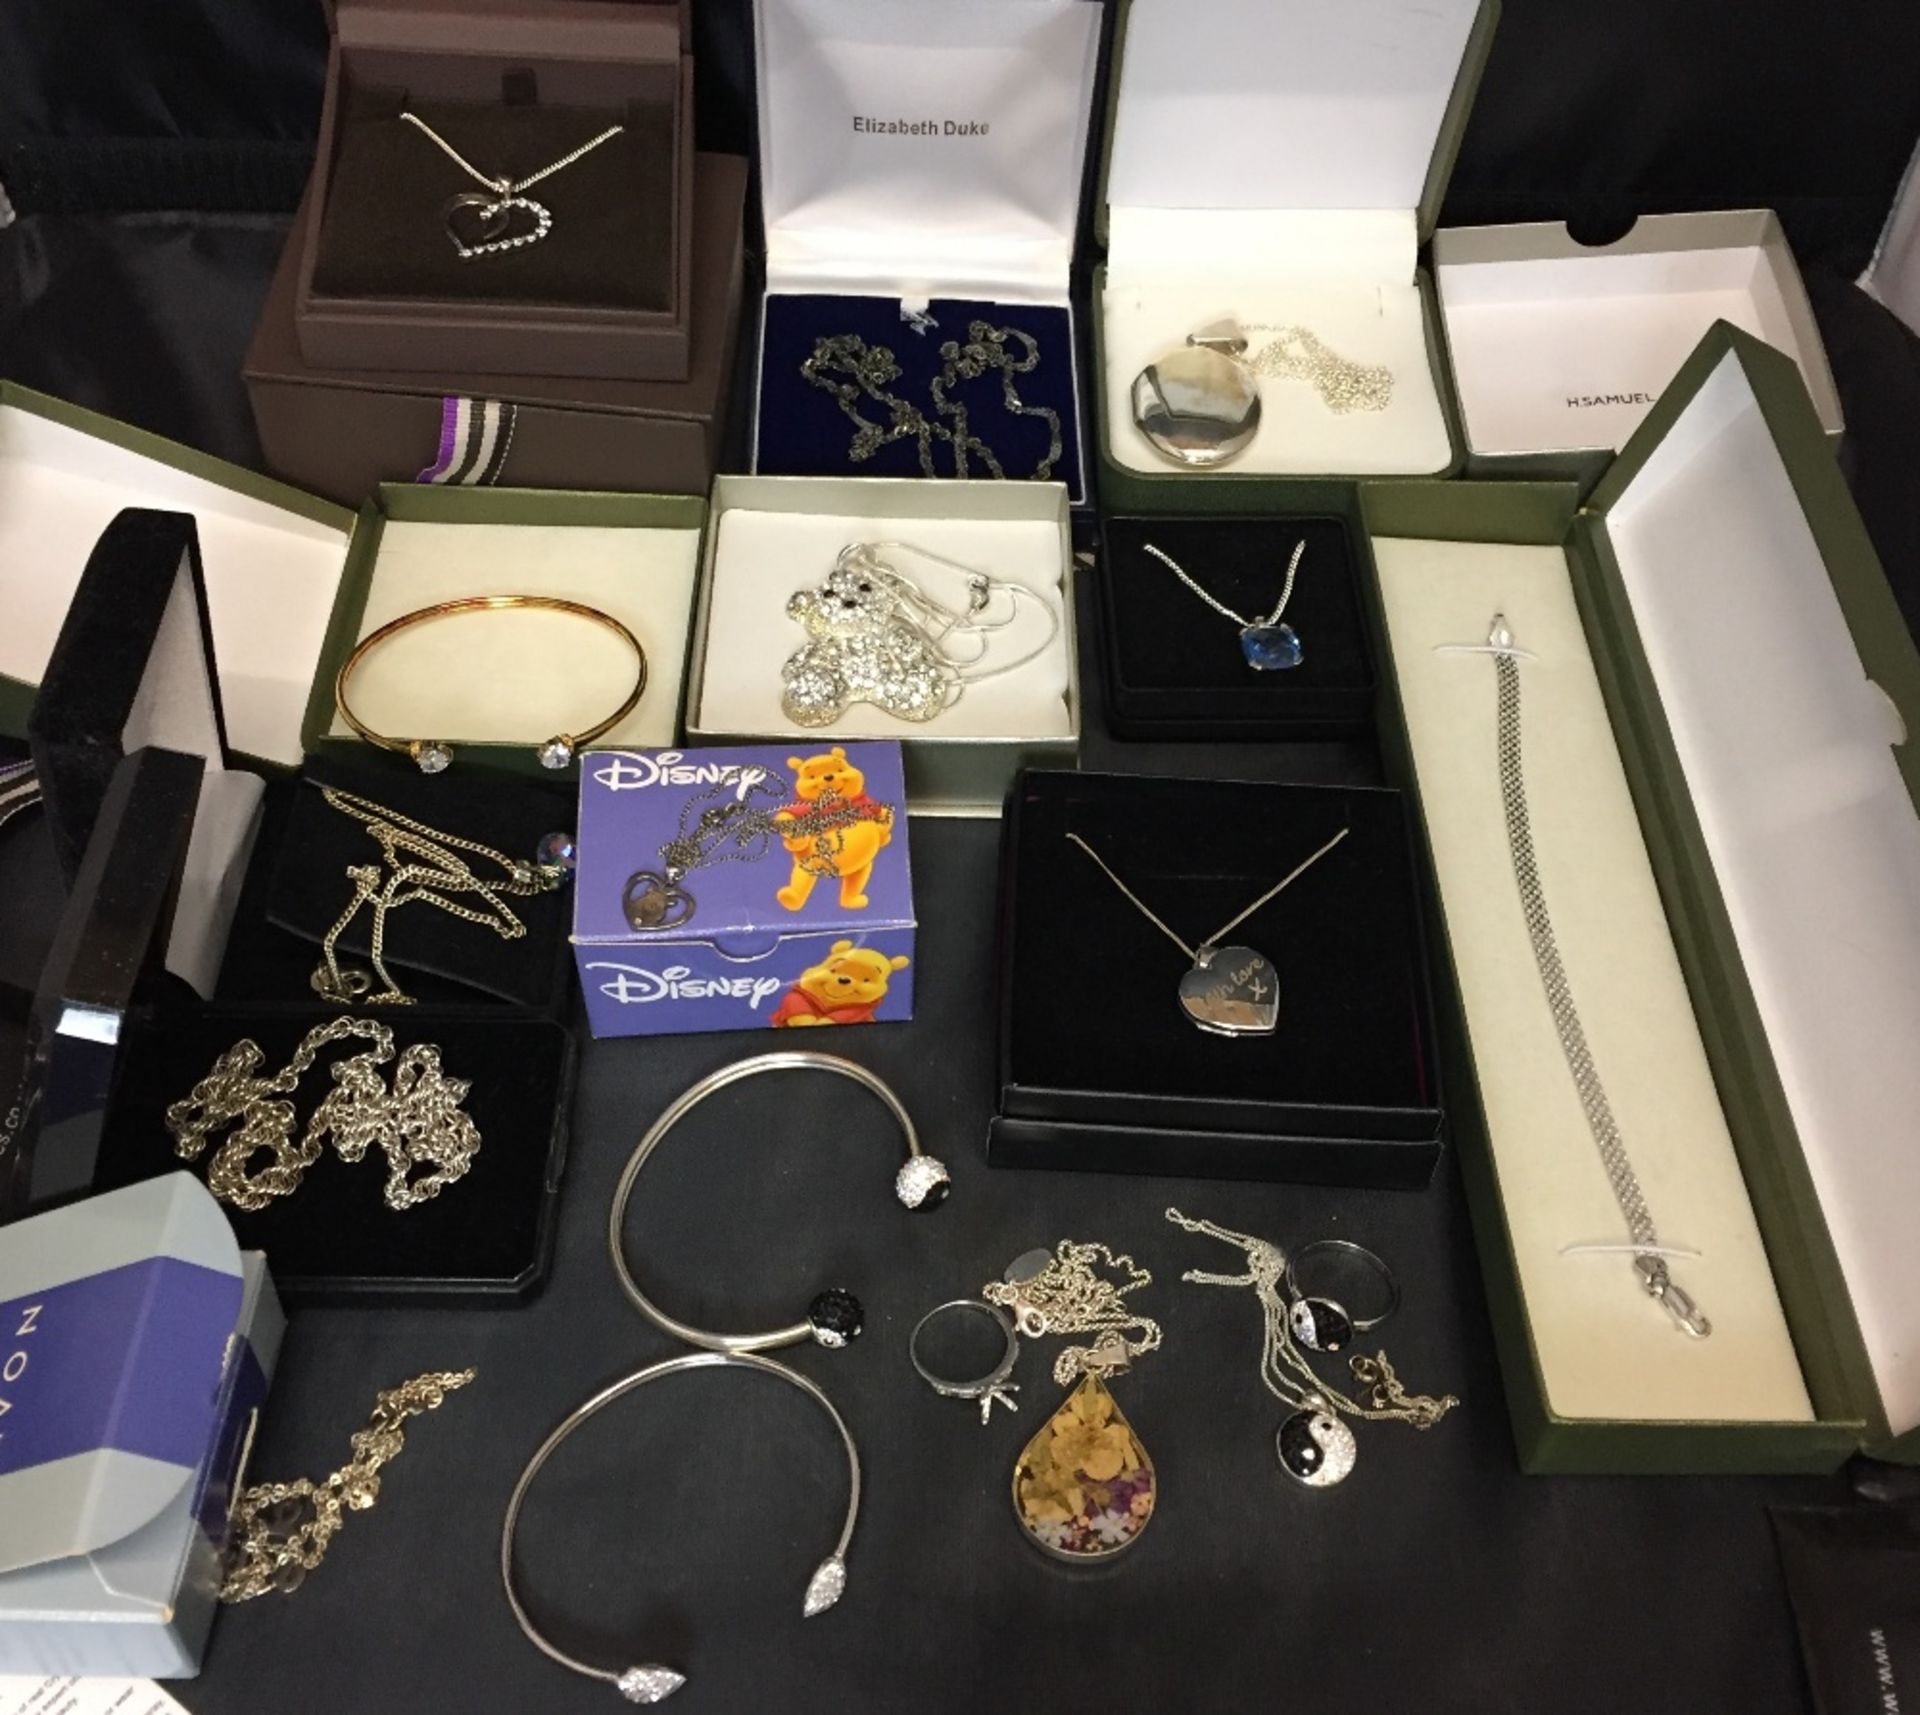 Sixteen sterling silver items - necklaces, lockets, pendants, bangles,